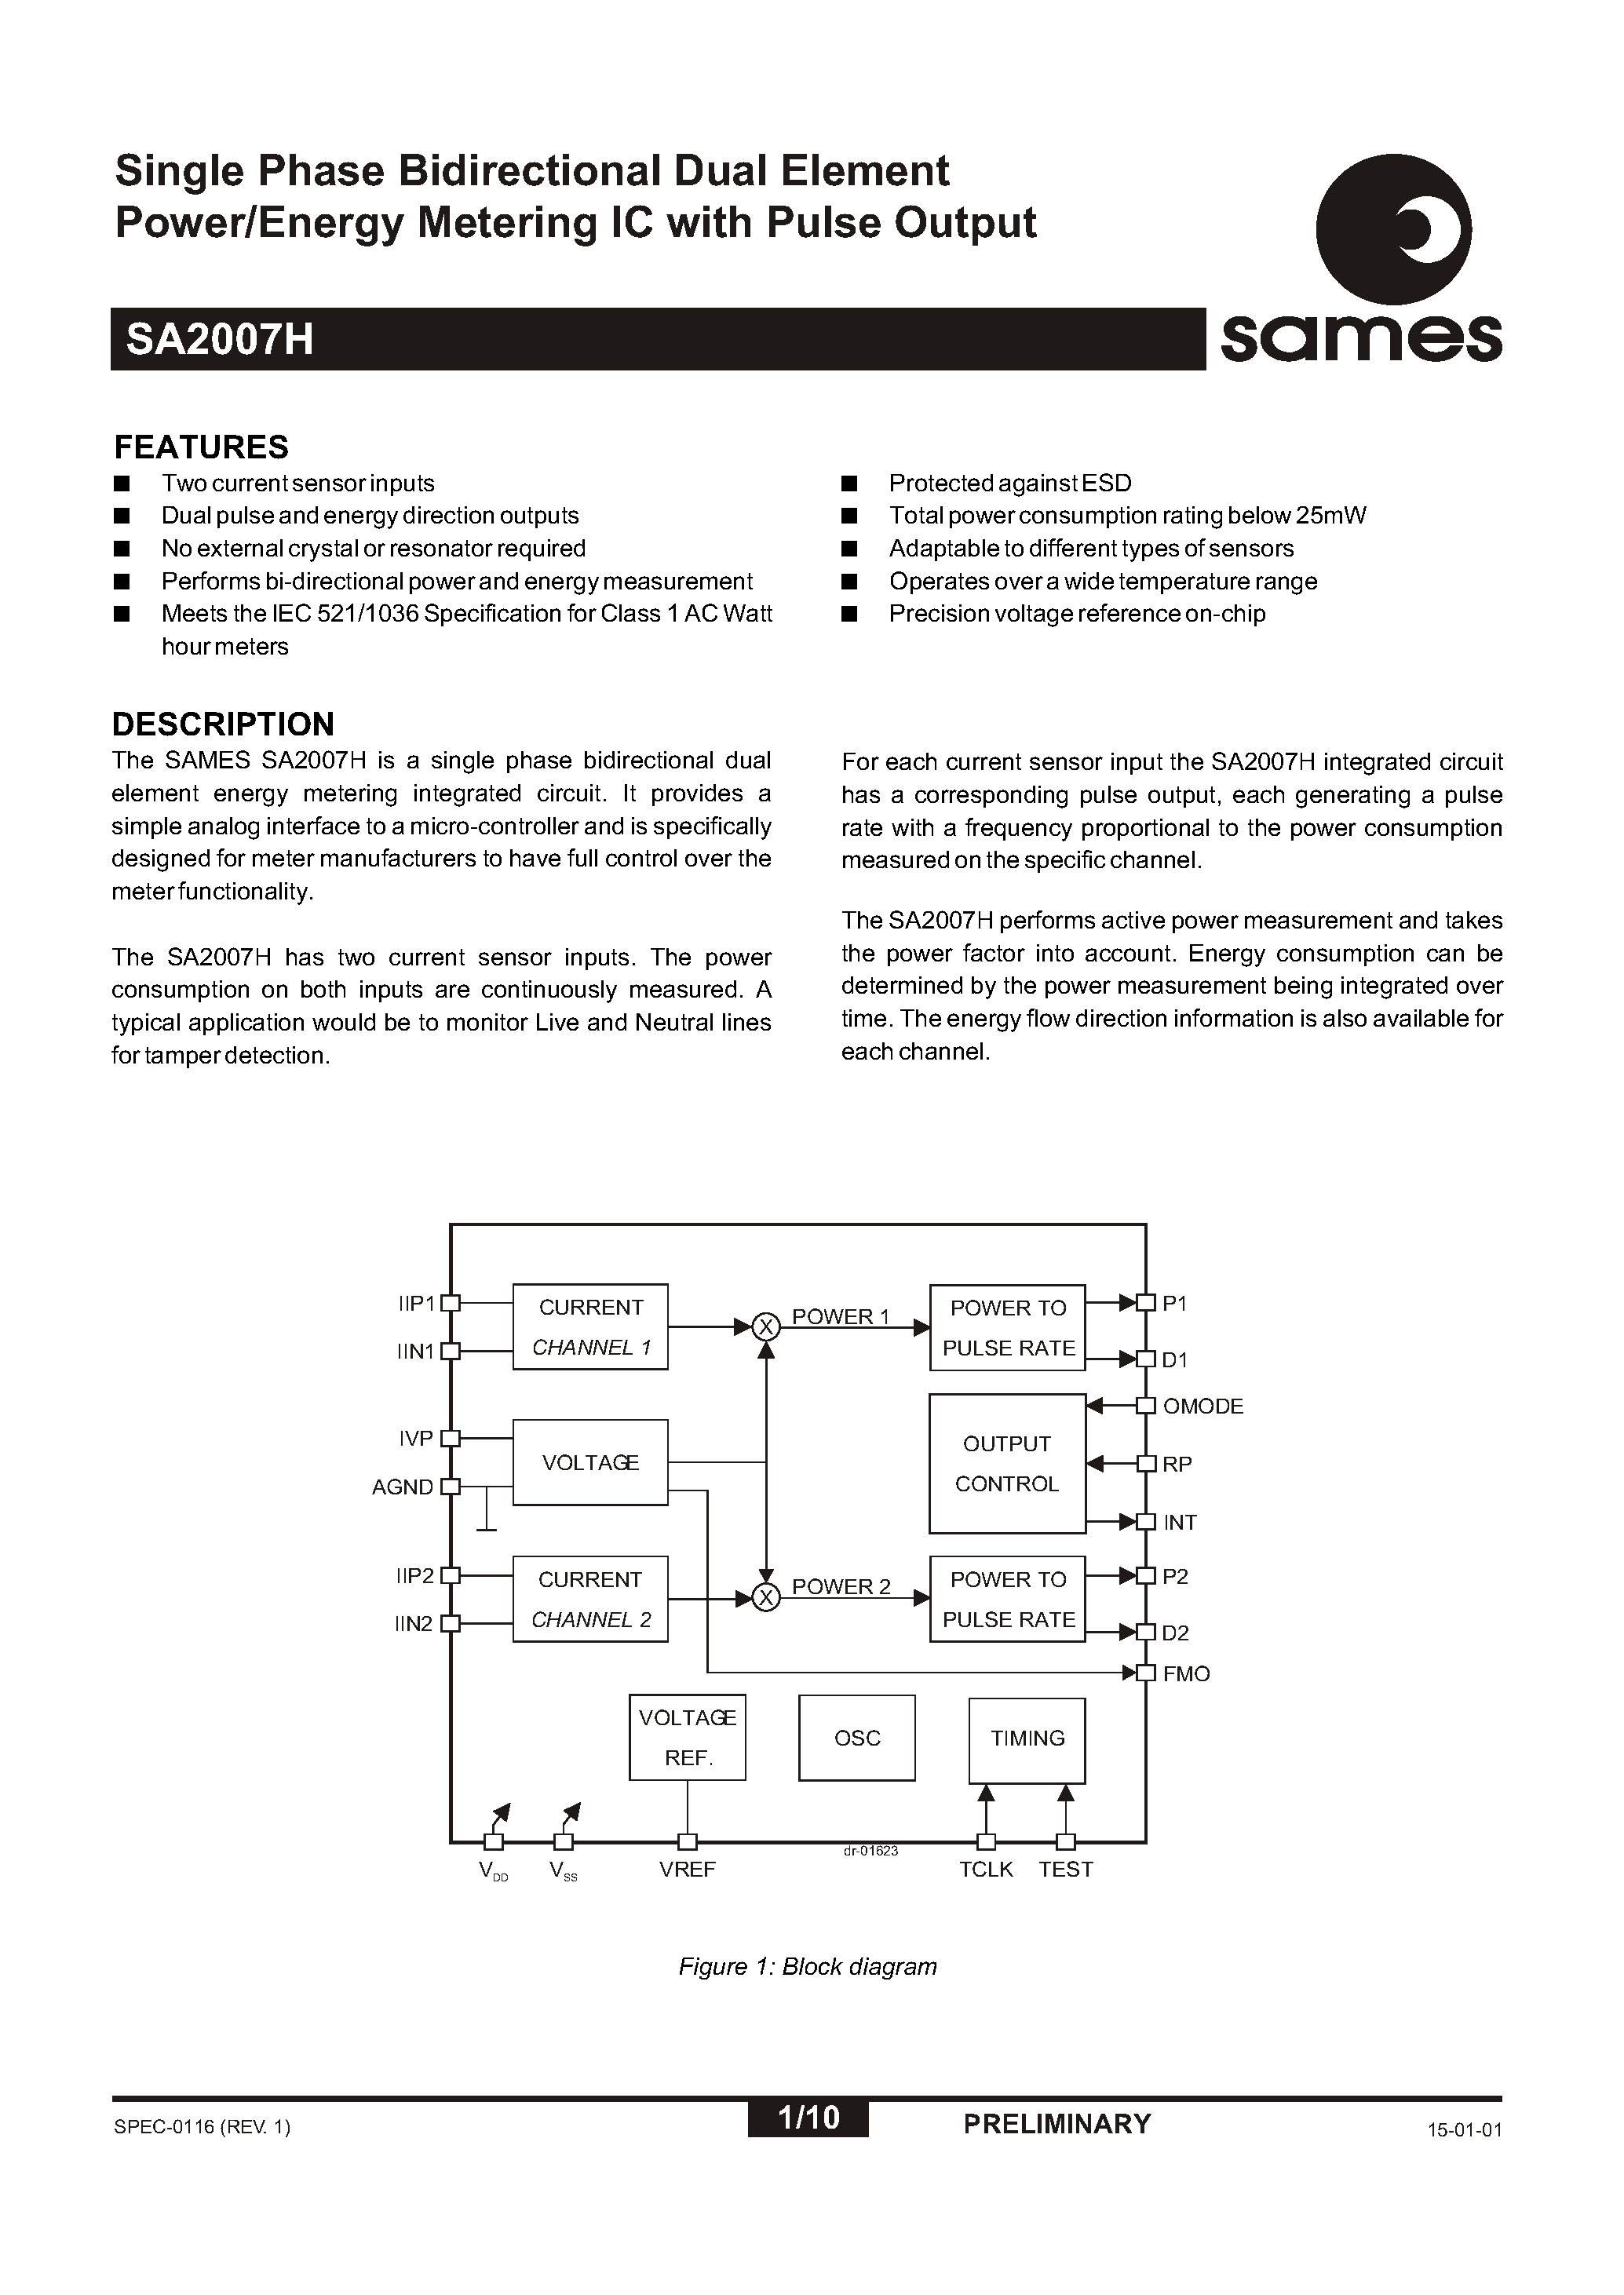 Datasheet SA2007HSA - Single Phase Bidirectional Dual Element Power/Energy Metering IC with Pulse Output page 1